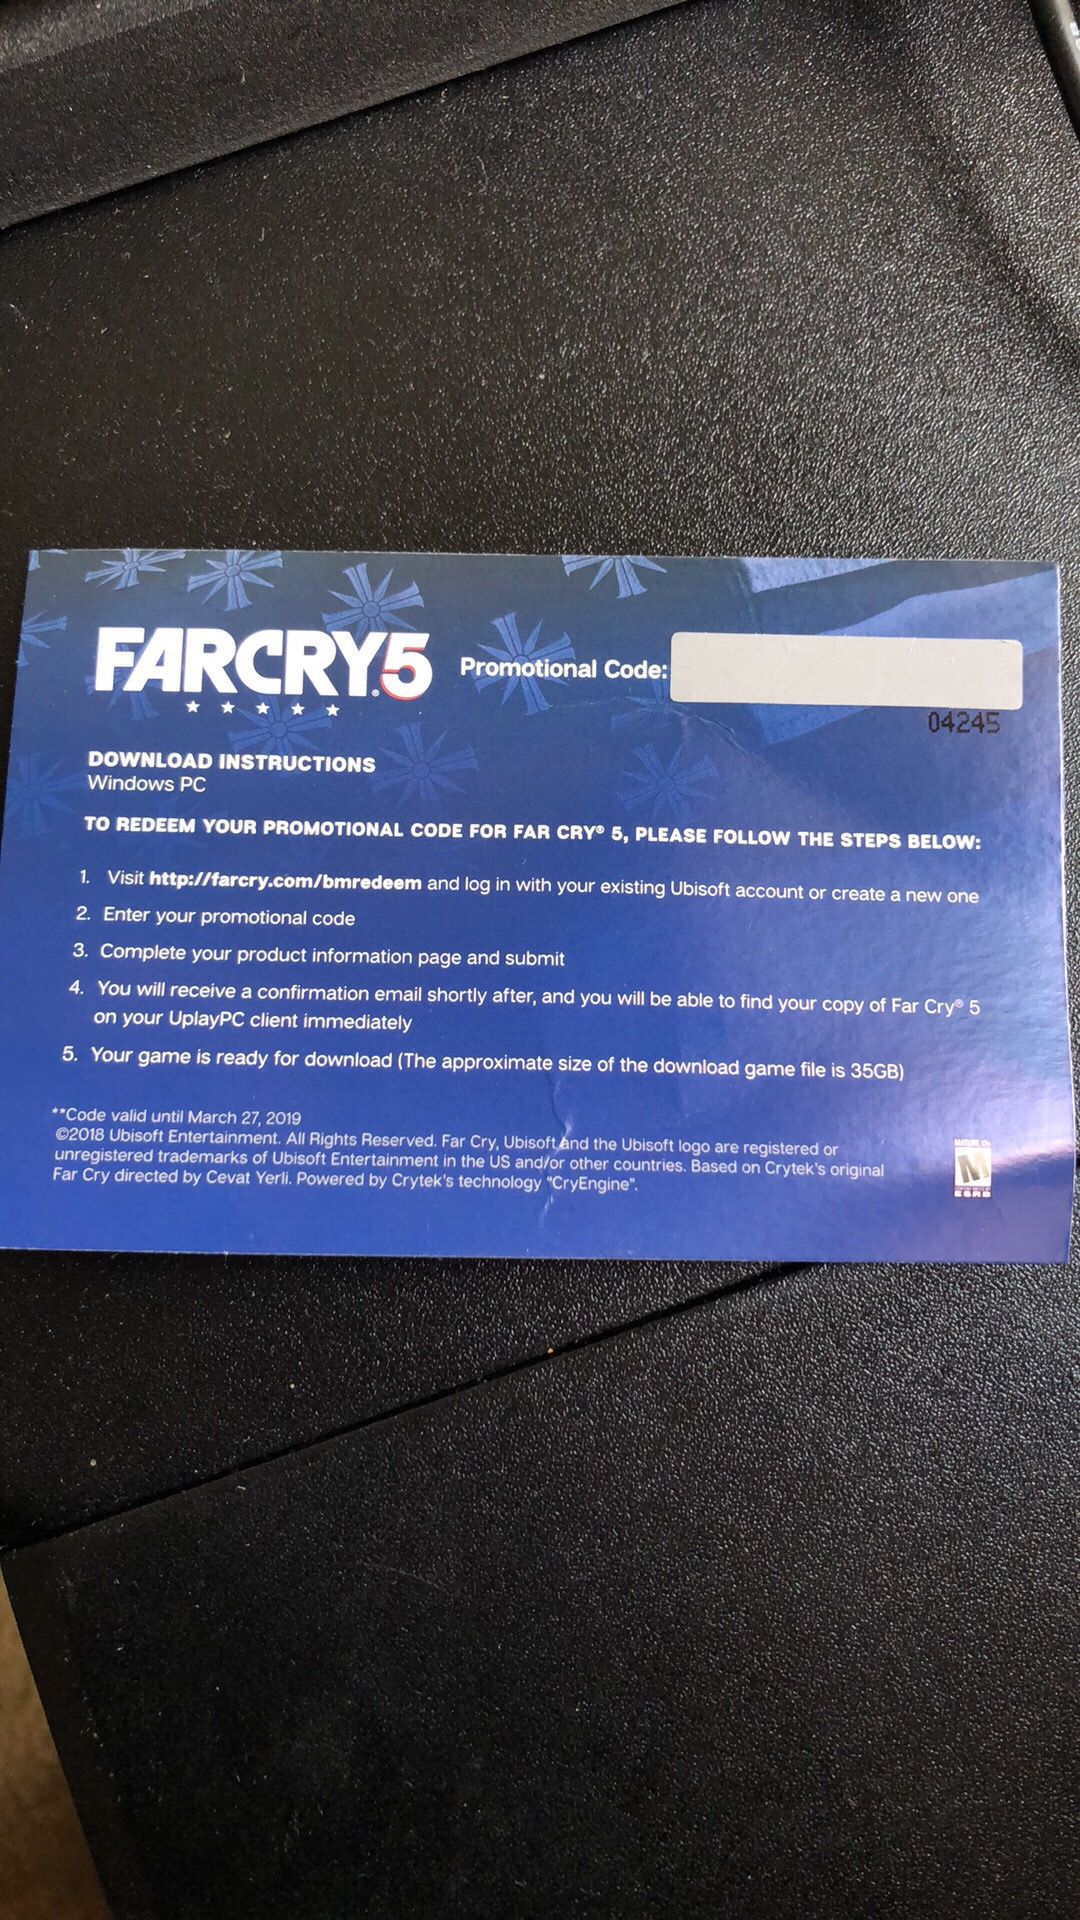 FARCRY5 Full game PC code